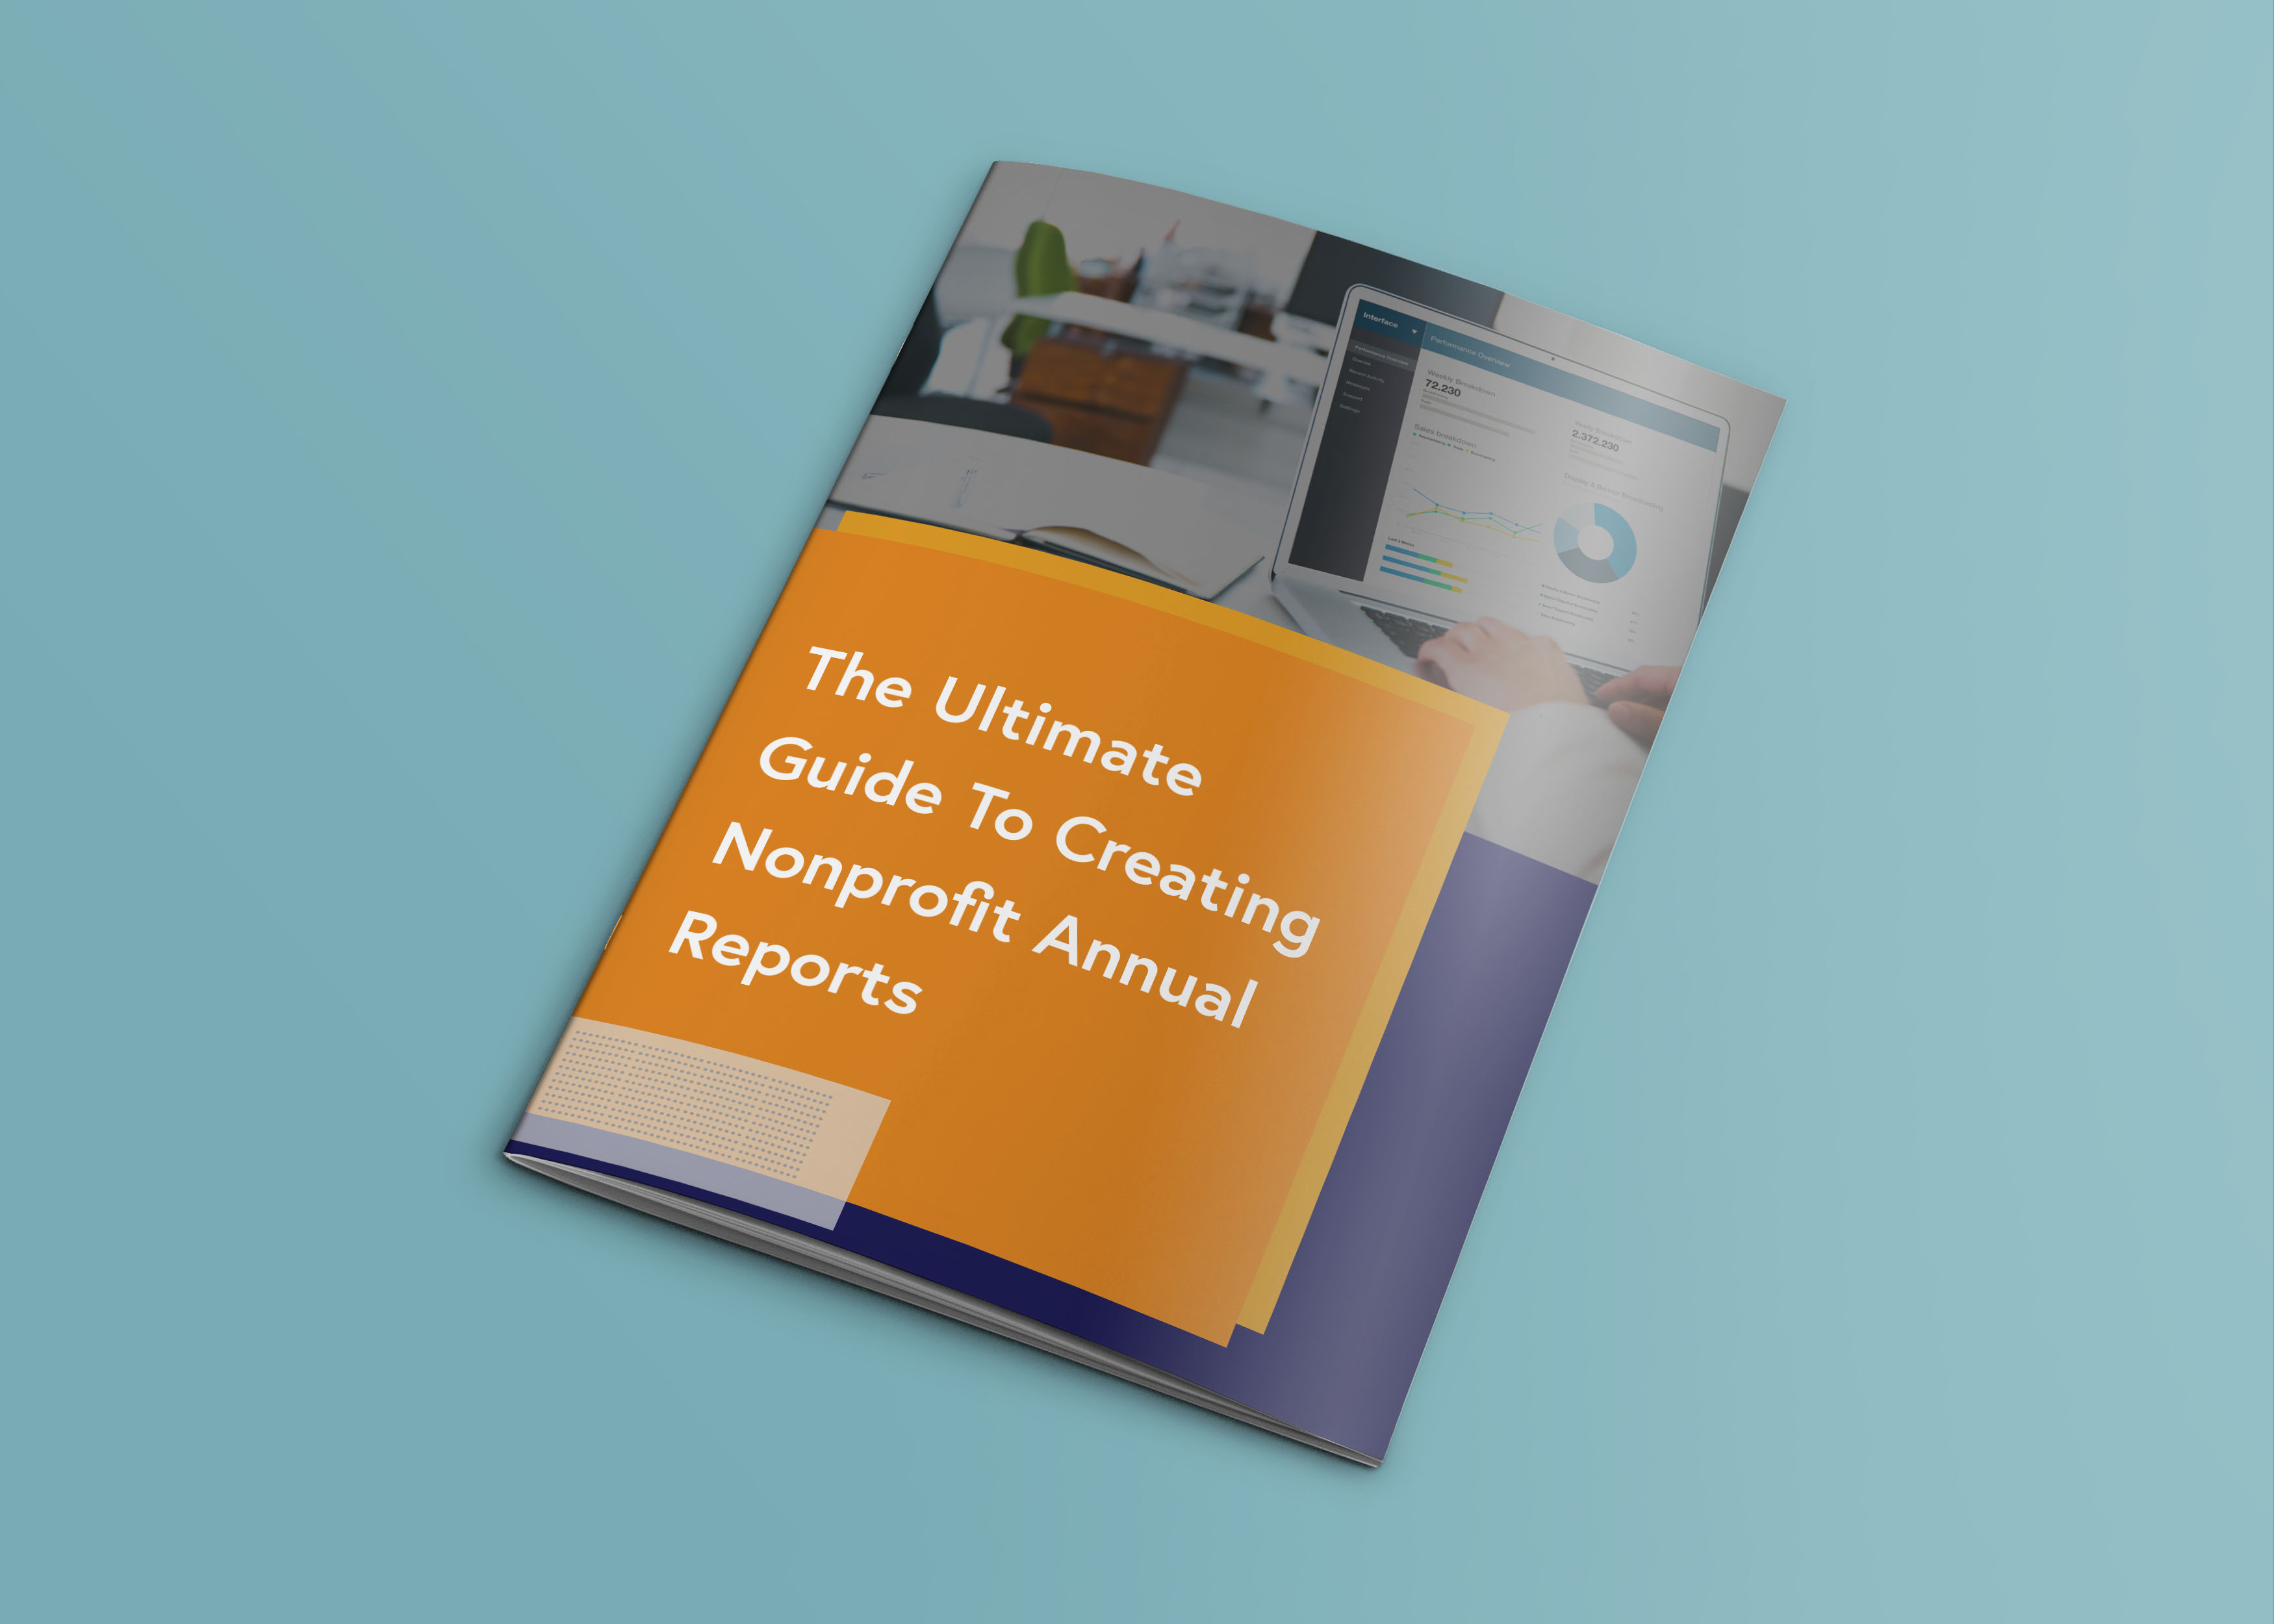 The Ultimate Guide To Creating Nonprofit Annual Reports In Chairman's Annual Report Template